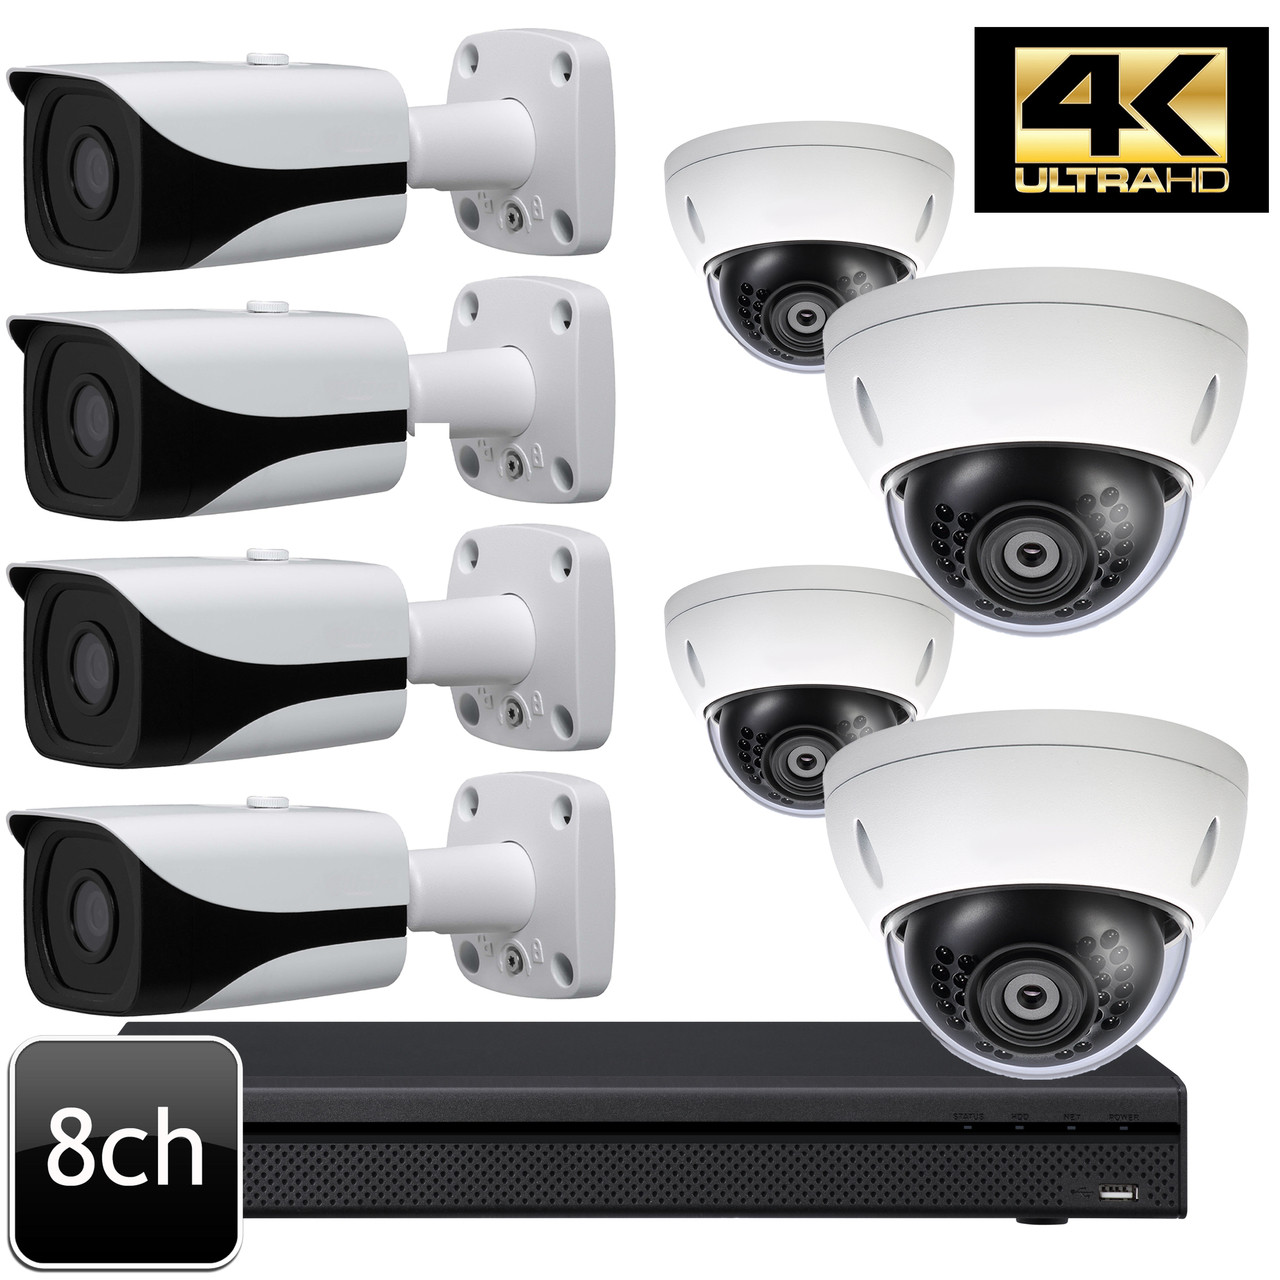 Details about   Dahua OEM 8 Channel H.265+HD 4K DVR 8x 1080P IR Camera Security System w/1TB HDD 